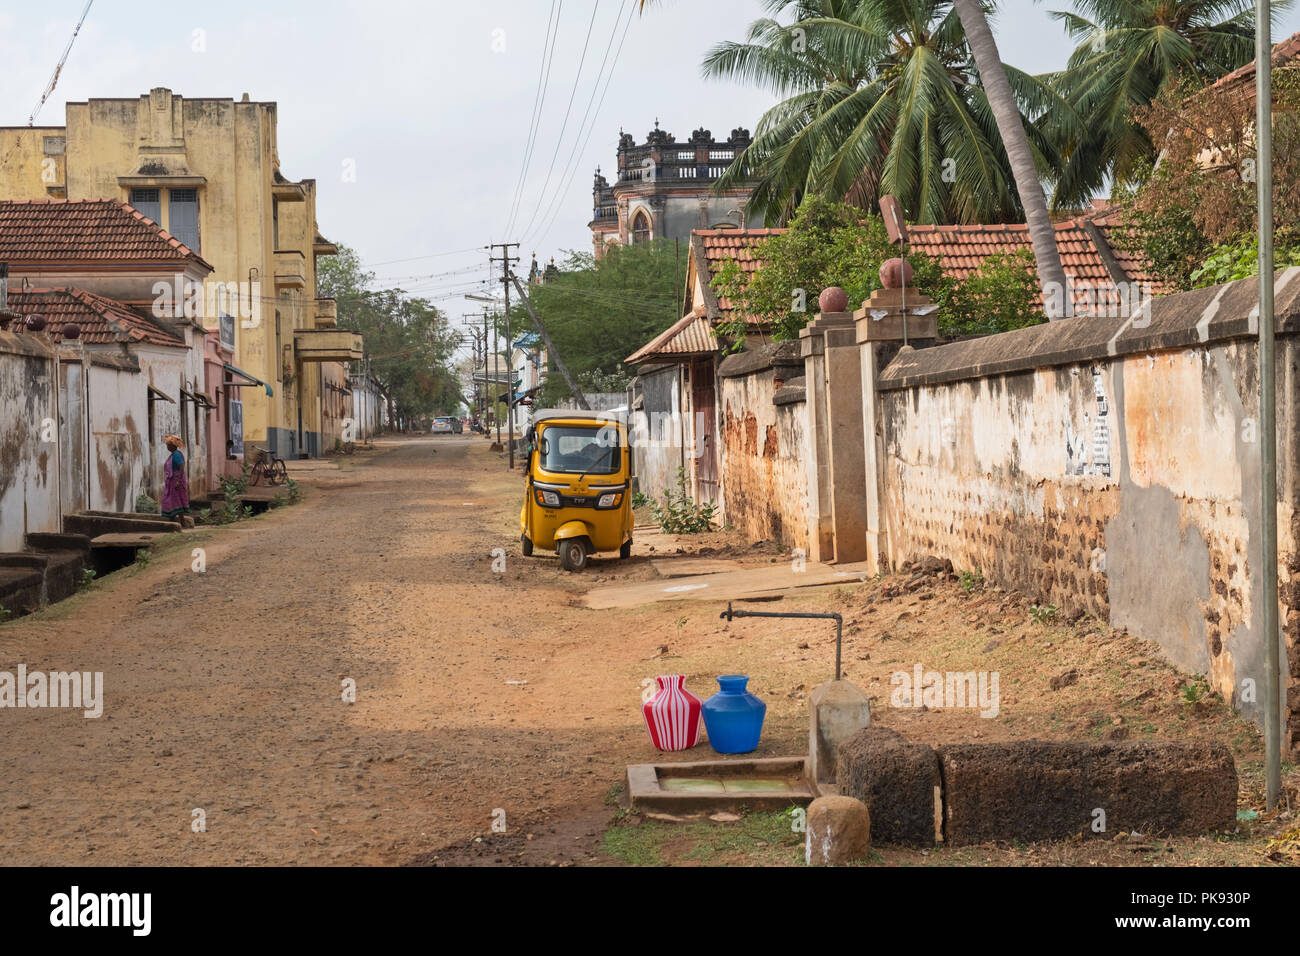 Kanadukathan, India - March 12, 2018: Street scene in the Chettinad area. The standpipe attests to the fact that many homes do not have a water supply Stock Photo